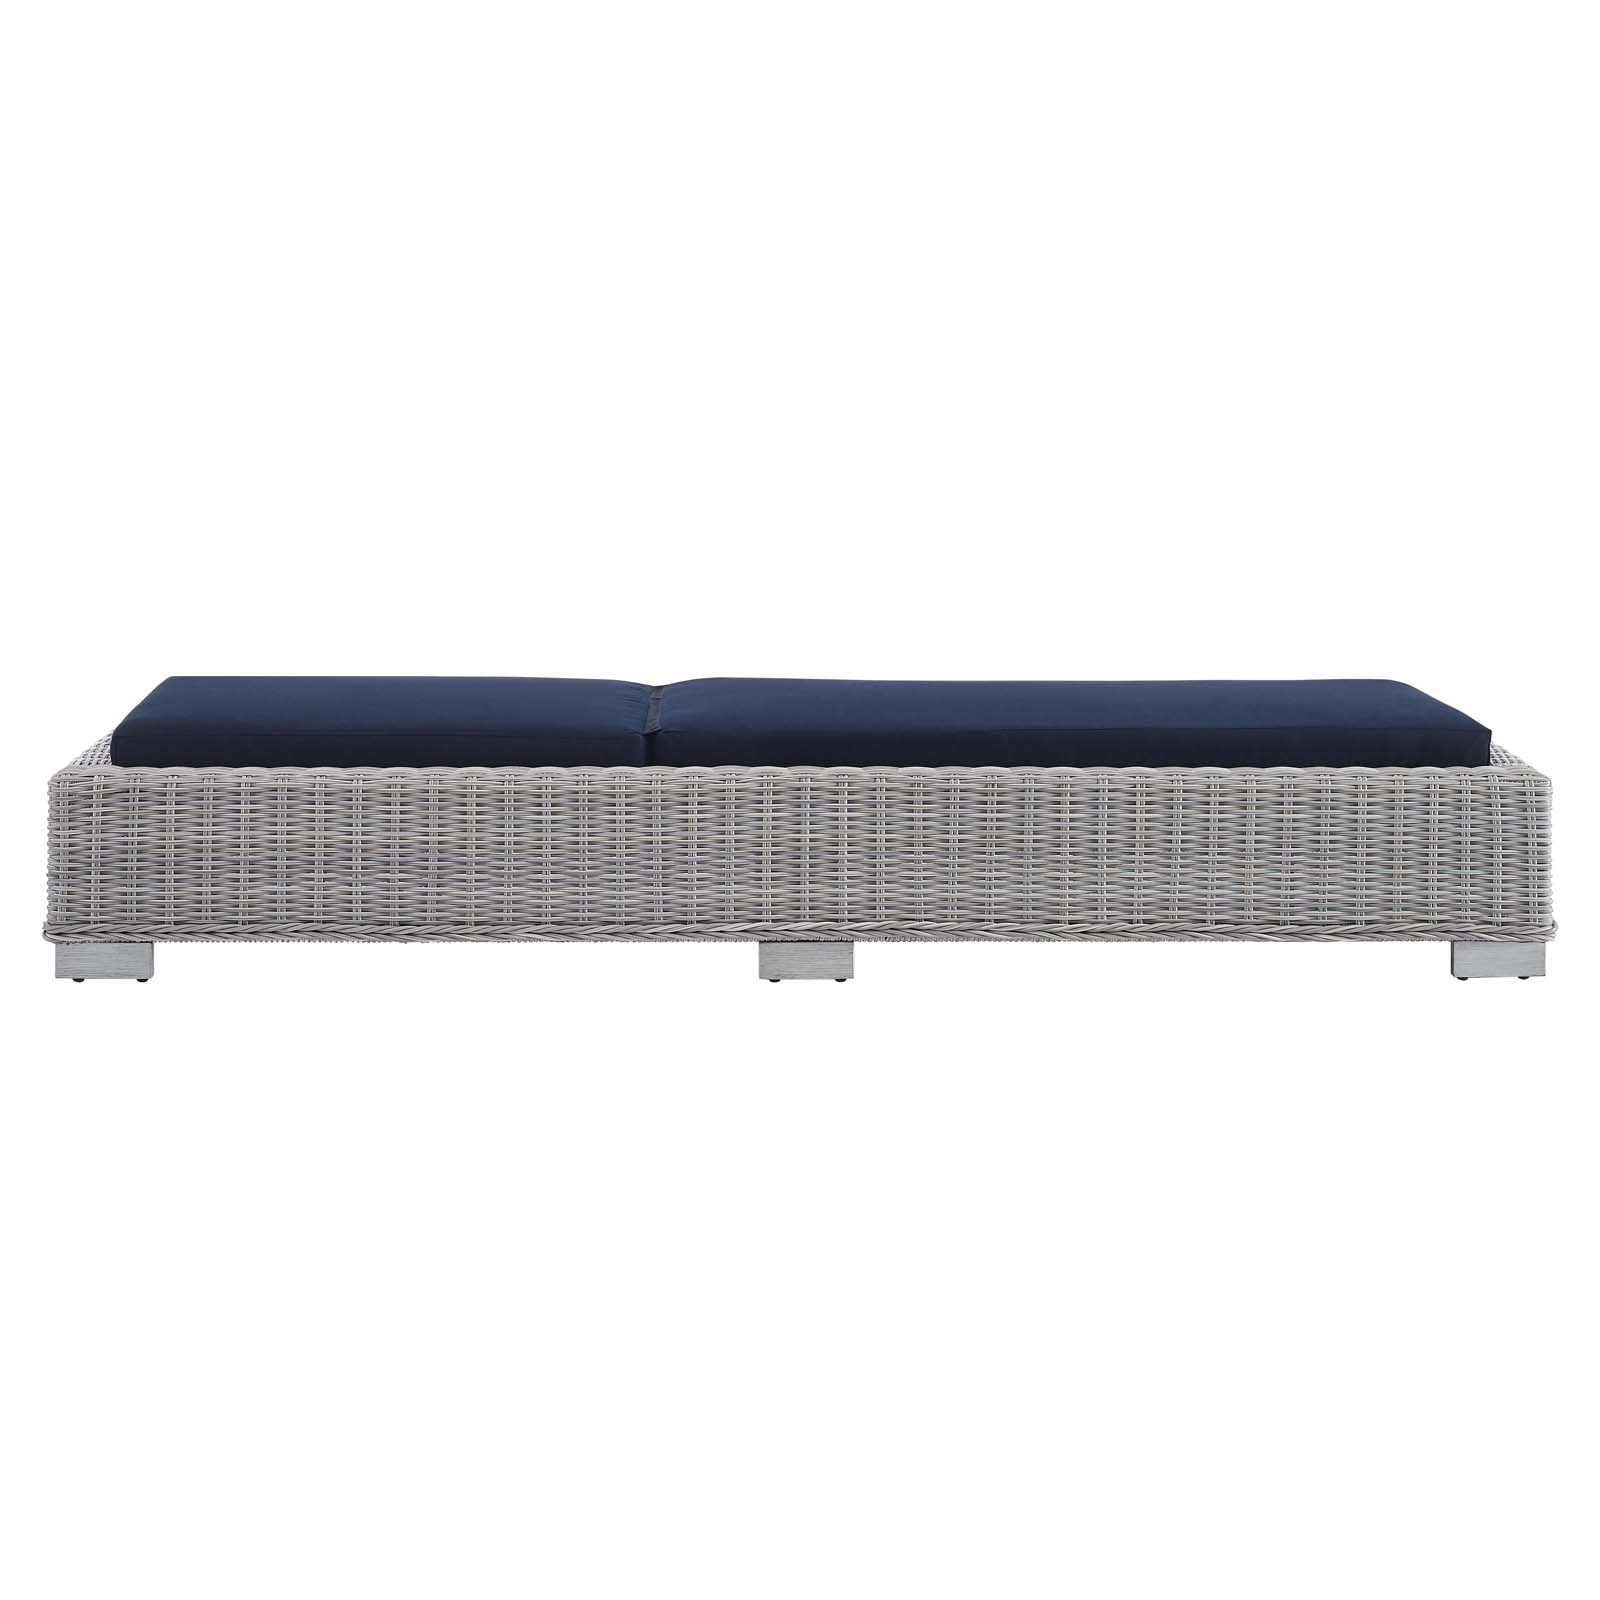 Modway Conway Sunbrella? Outdoor Patio Wicker Rattan Chaise Lounge in Light Gray Navy - image 4 of 10